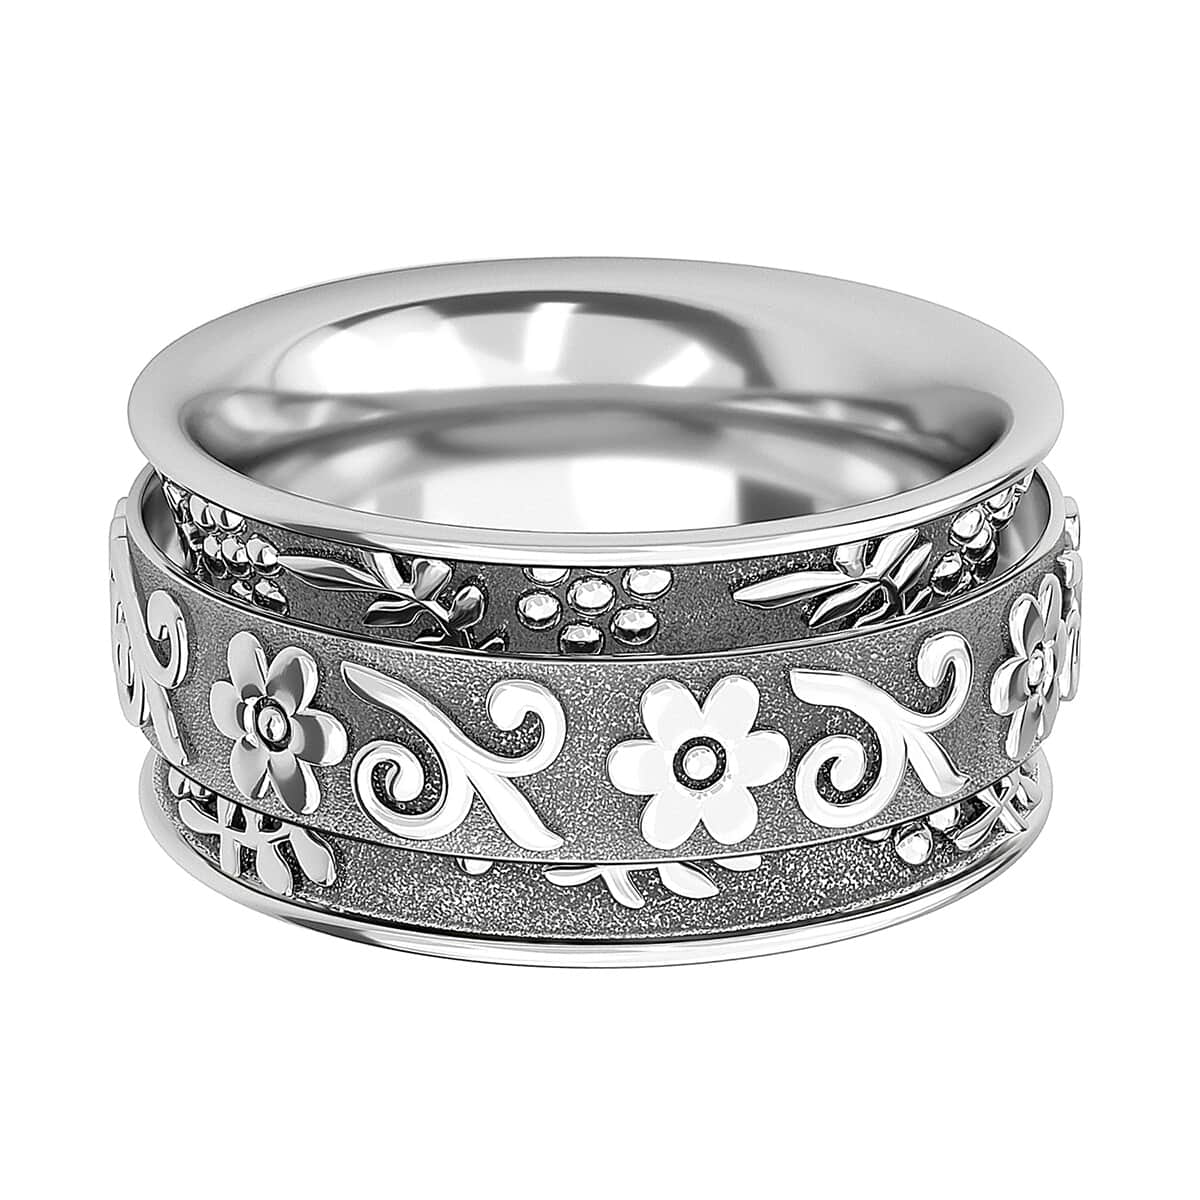 Artisan Crafted Sterling Silver Spinner Ring, Fidget Rings for Anxiety, Stress Relieving Anxiety Ring Band 4.25 g (Size 9) image number 6